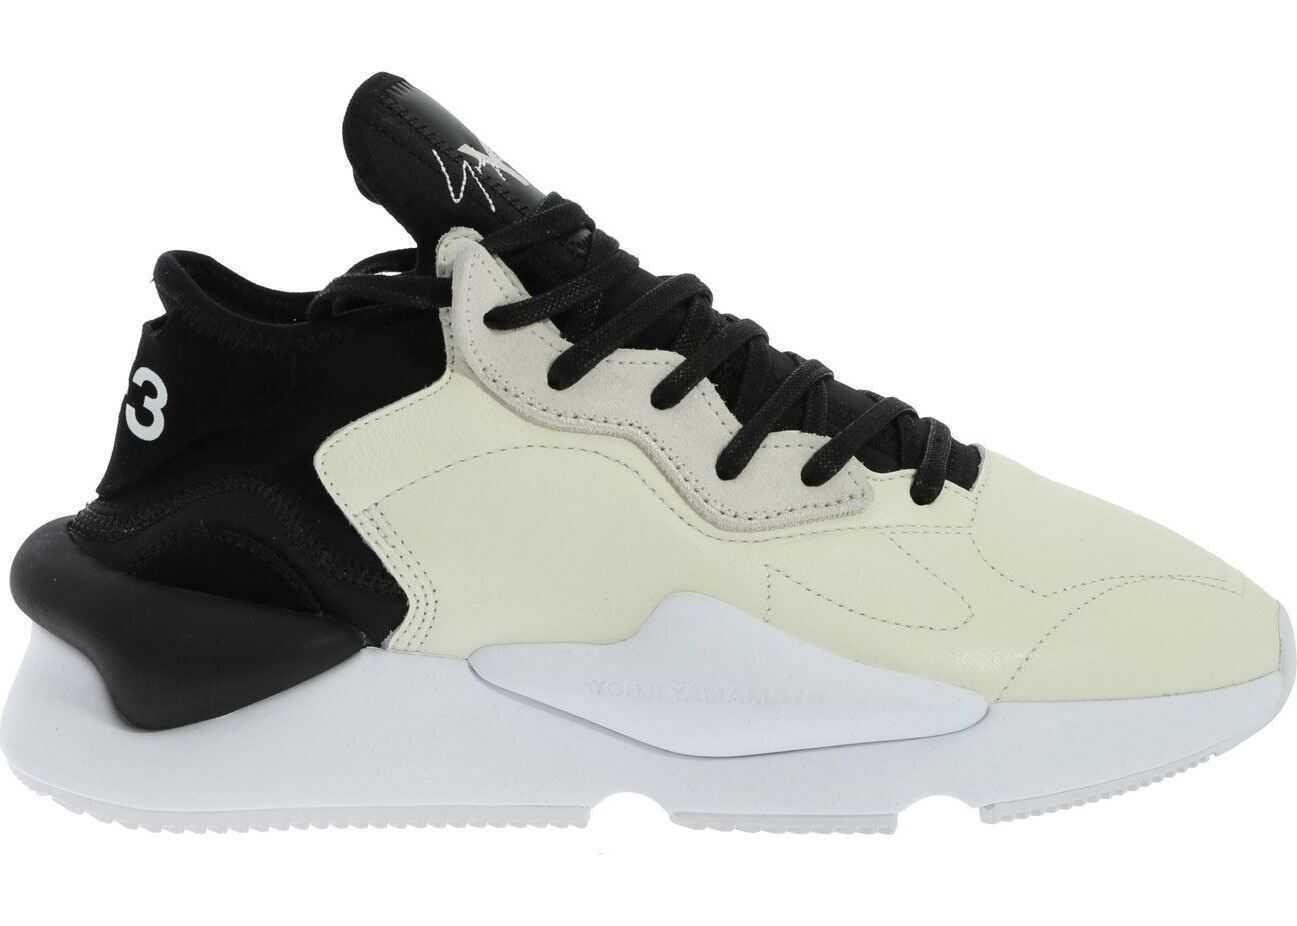 Y-3 Kaiwa Sneakers In Cream And Black White